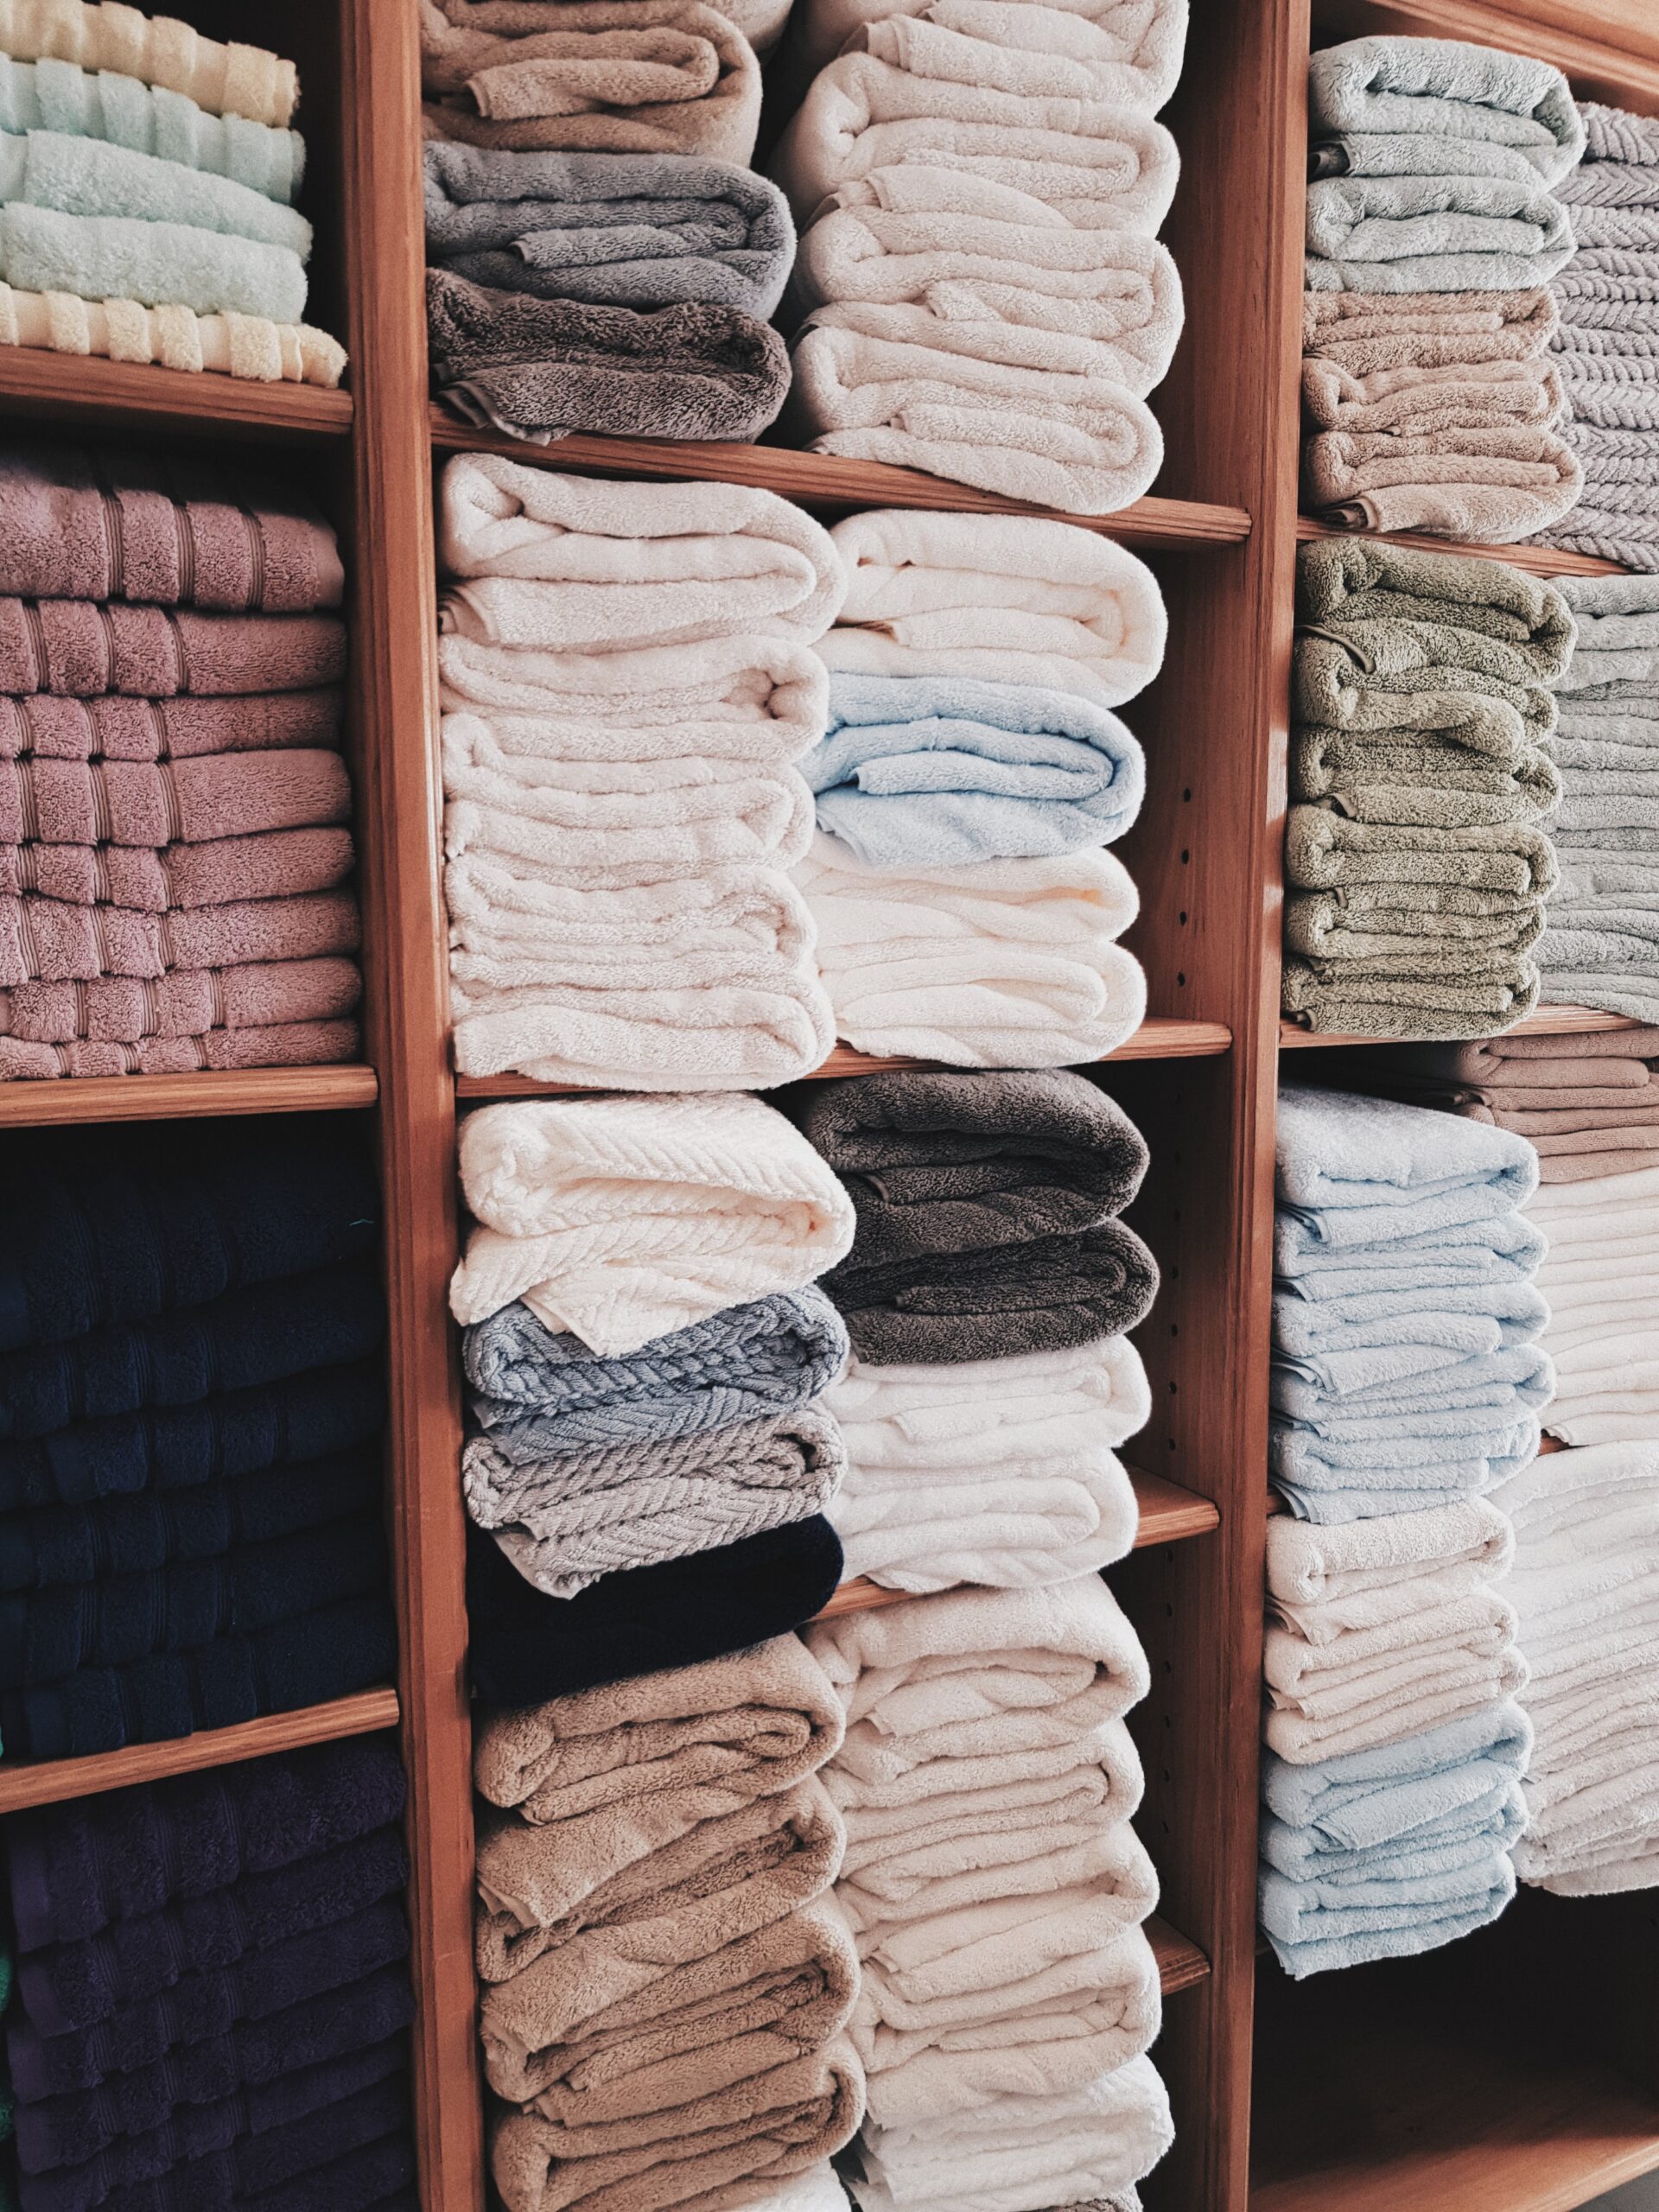 Things You Should Know When Buying Luxury Bathroom Towels